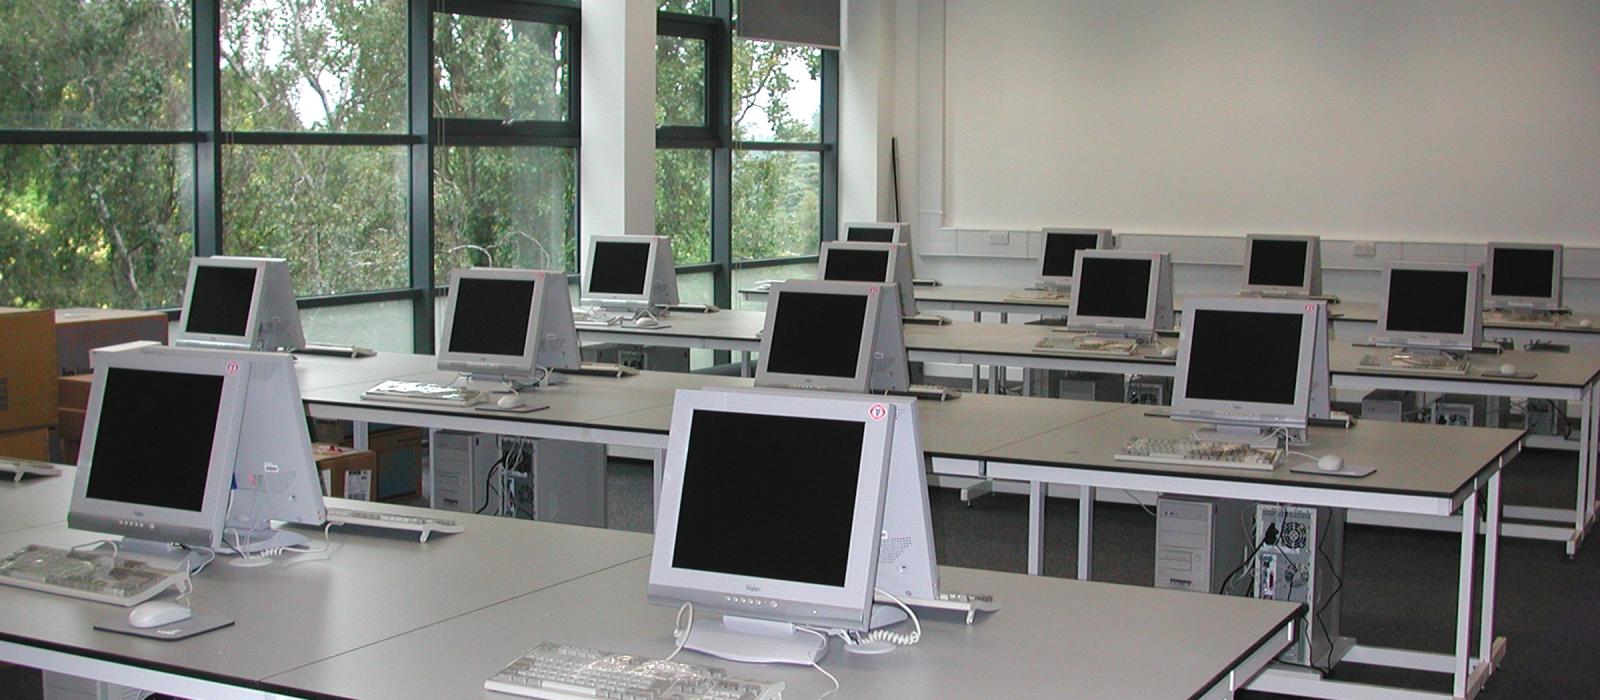 Computer Assisted Learning Laboratory, Medical Sciences Teaching Centre